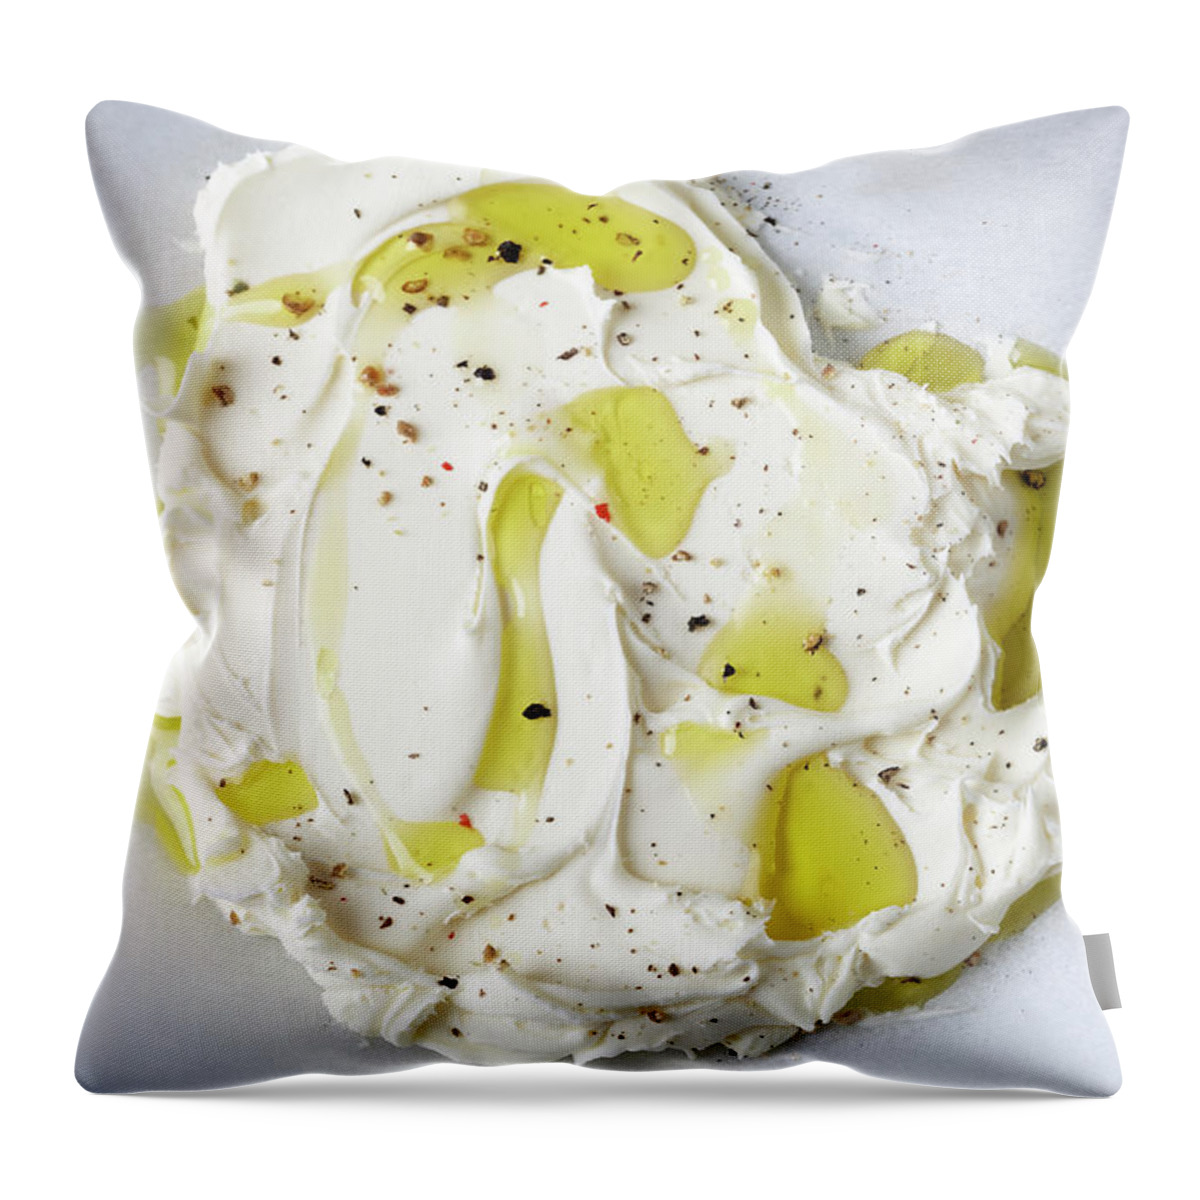 Italian Food Throw Pillow featuring the photograph Mascarpone Cheese by James And James